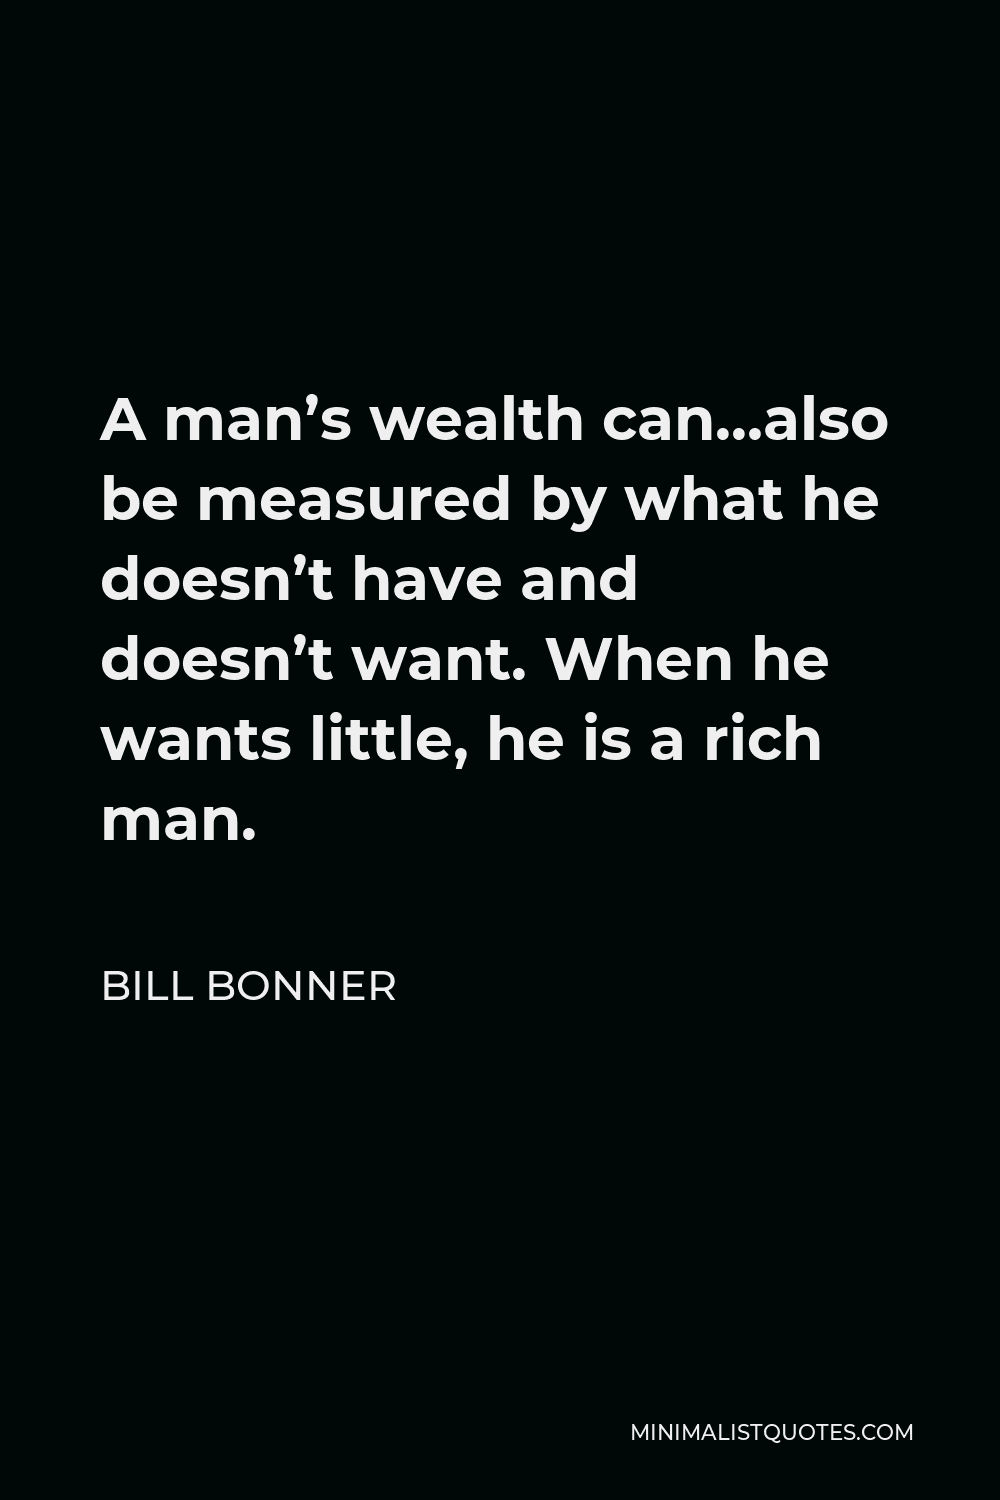 Bill Bonner Quote - A man’s wealth can…also be measured by what he doesn’t have and doesn’t want. When he wants little, he is a rich man.